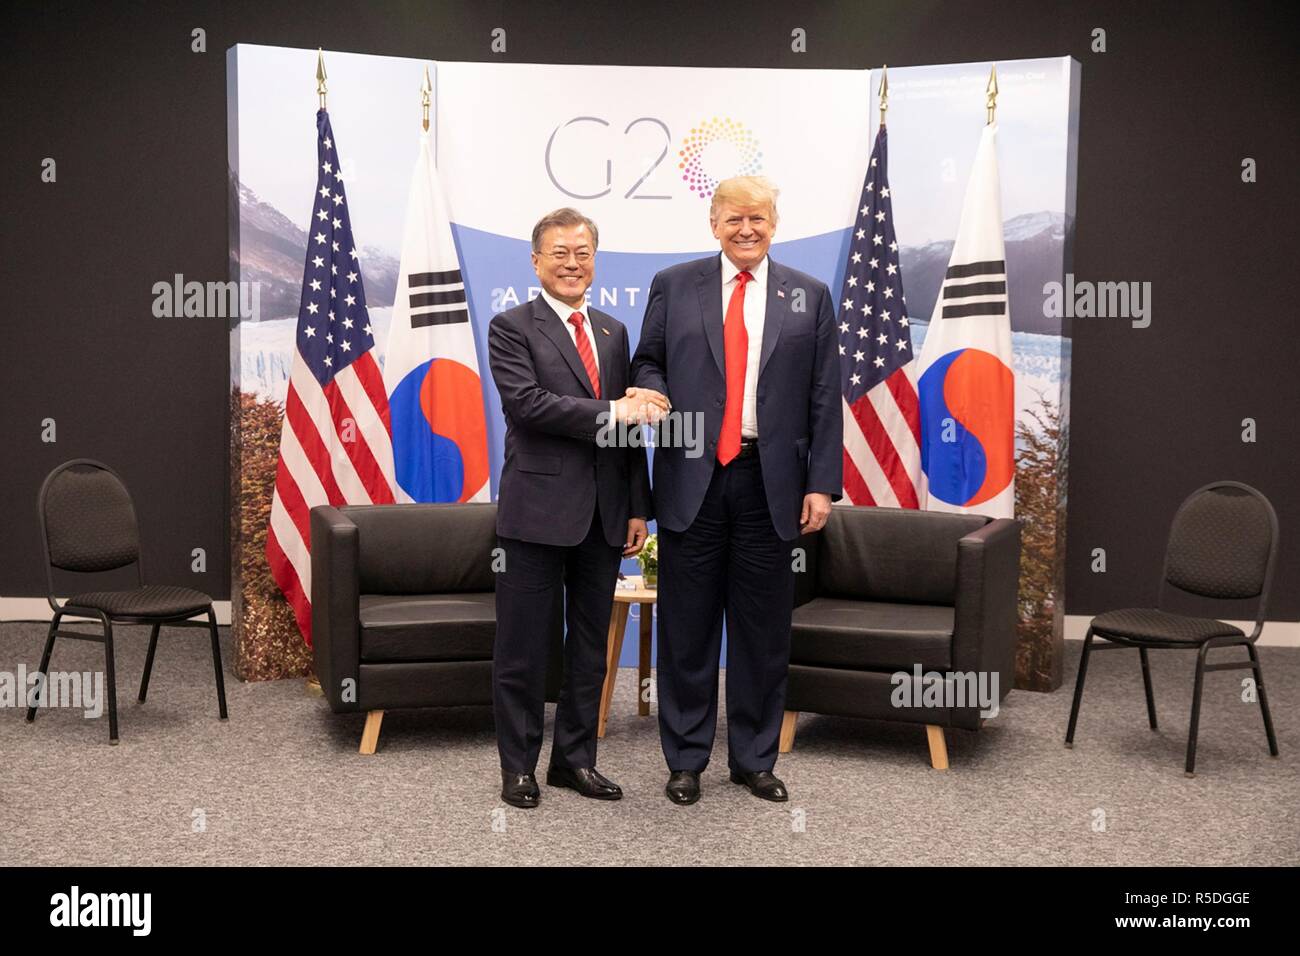 Buenos Aires, Argentina. 1st December, 2018. Buenos Aires, Argentina. 30th November 2018. U.S. President Donald Trump shakes hands with South Korean President Moon Jae-in, left, prior to their bilateral meeting on the sidelines of the G20 Summit meeting at the Costa Salguero Center November 30, 2018 in Buenos Aires, Argentina. Credit: Planetpix/Alamy Live News Credit: Planetpix/Alamy Live News Stock Photo